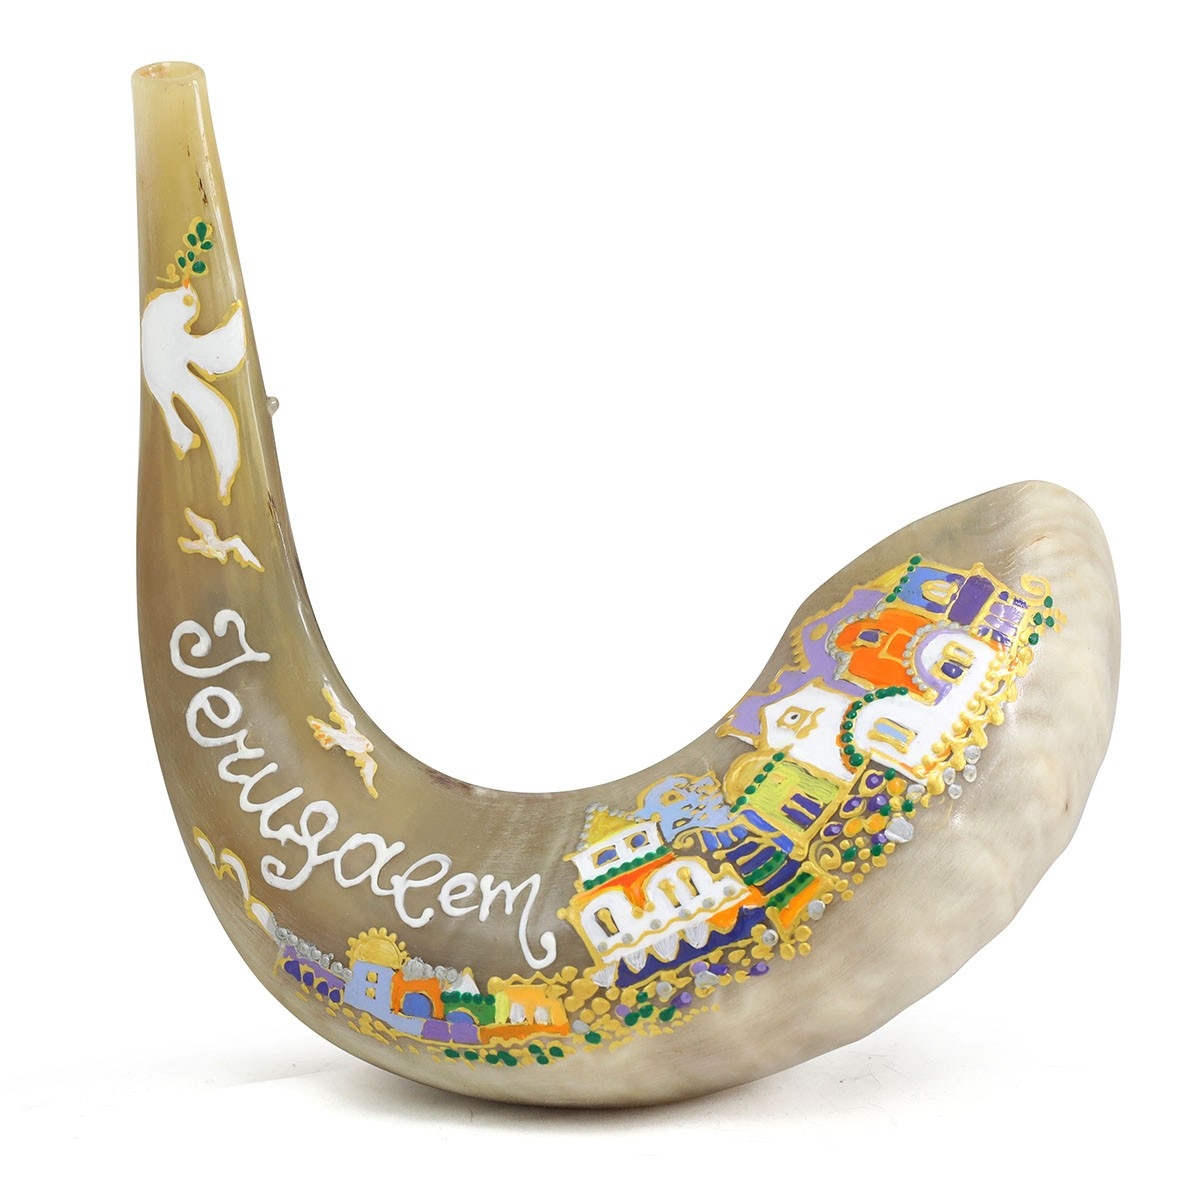 Hand Painted Ram’s Horn Shofar with Jerusalem and Dove of Peace - 1